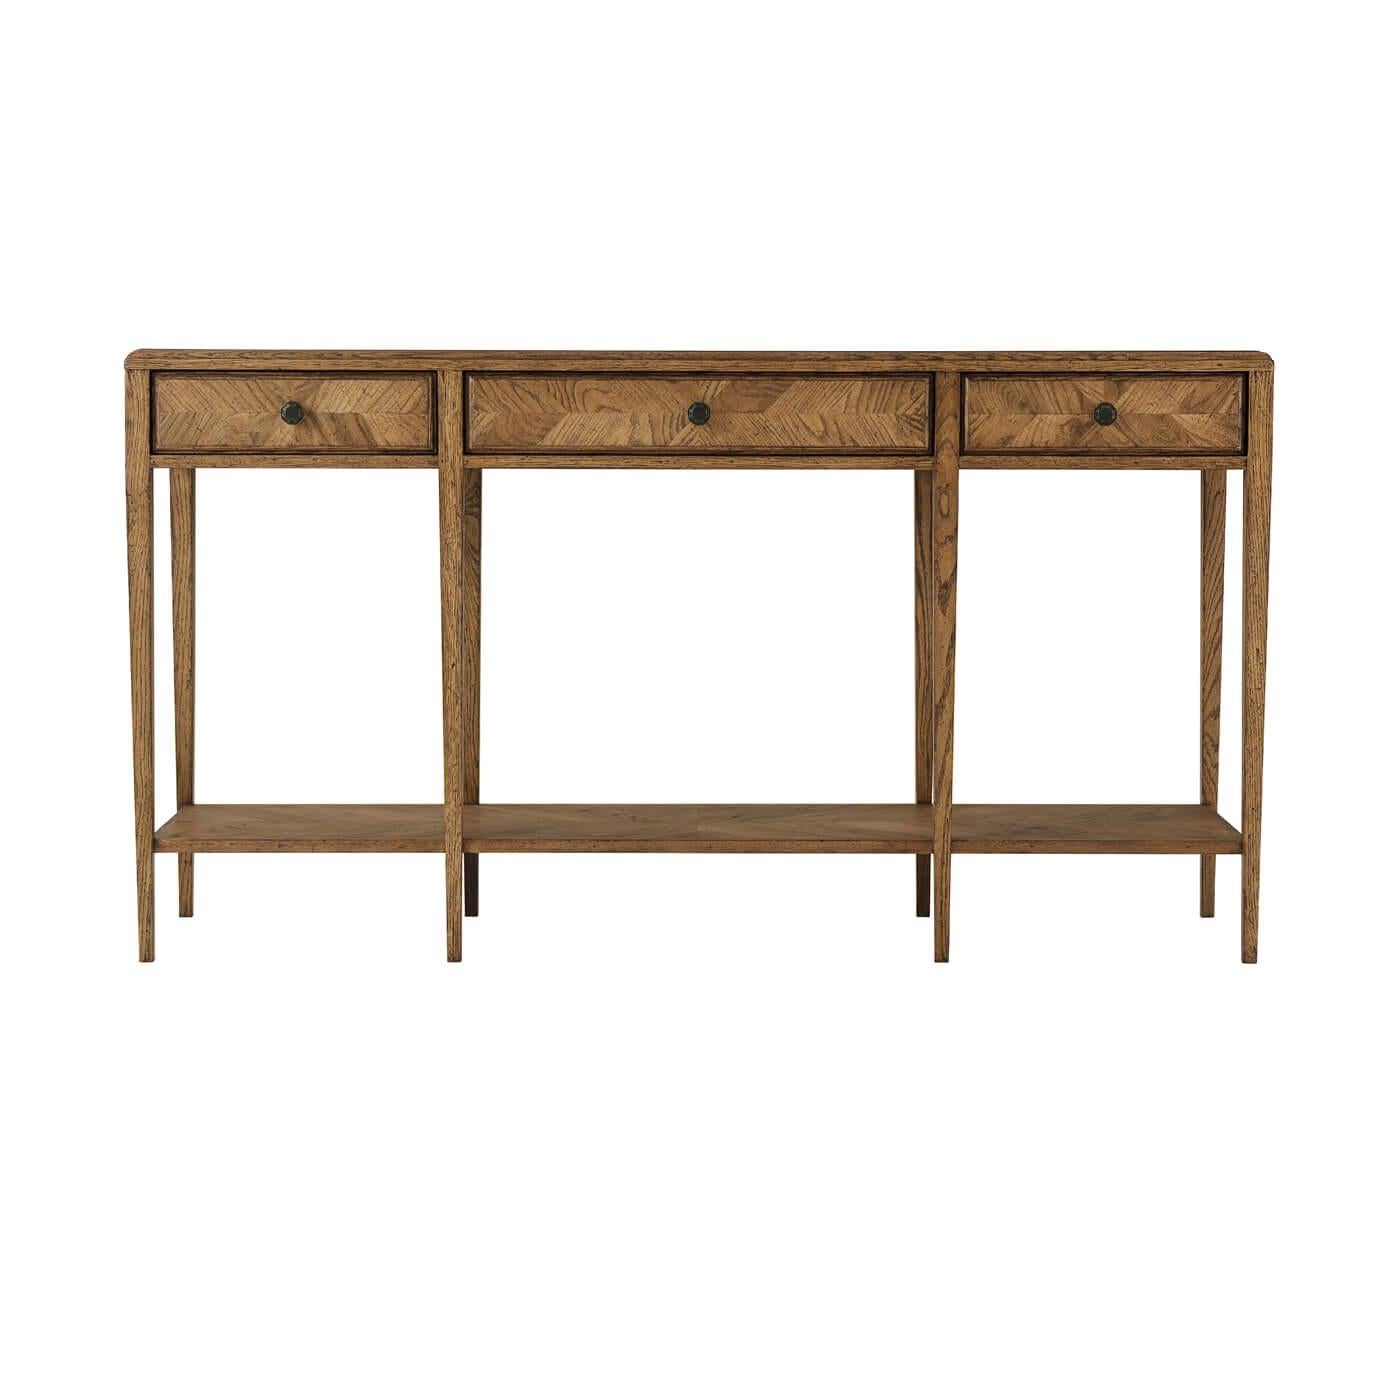 An oak parquetry two-tier console table with mirrored herringbone oak parquetry on its top and drawer faces. This two-tiered table includes three frieze drawers accented with Verde Bronze finished handles and has solid tapered legs. It is shown in